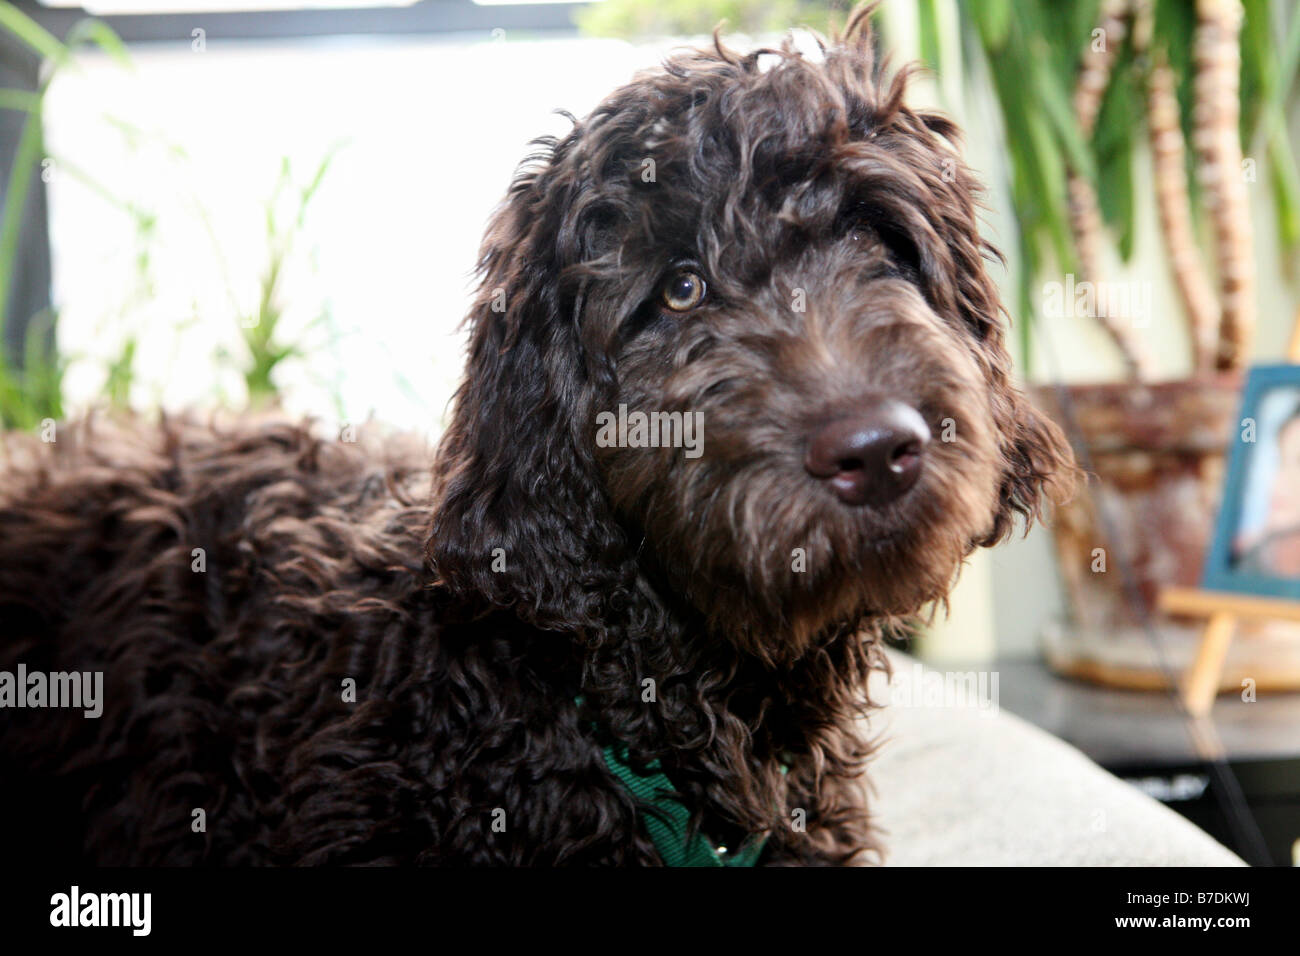 A chocolate brown Portuguese Water dog - Labradoodle sits patiently. Photo by Tom Zuback Stock Photo